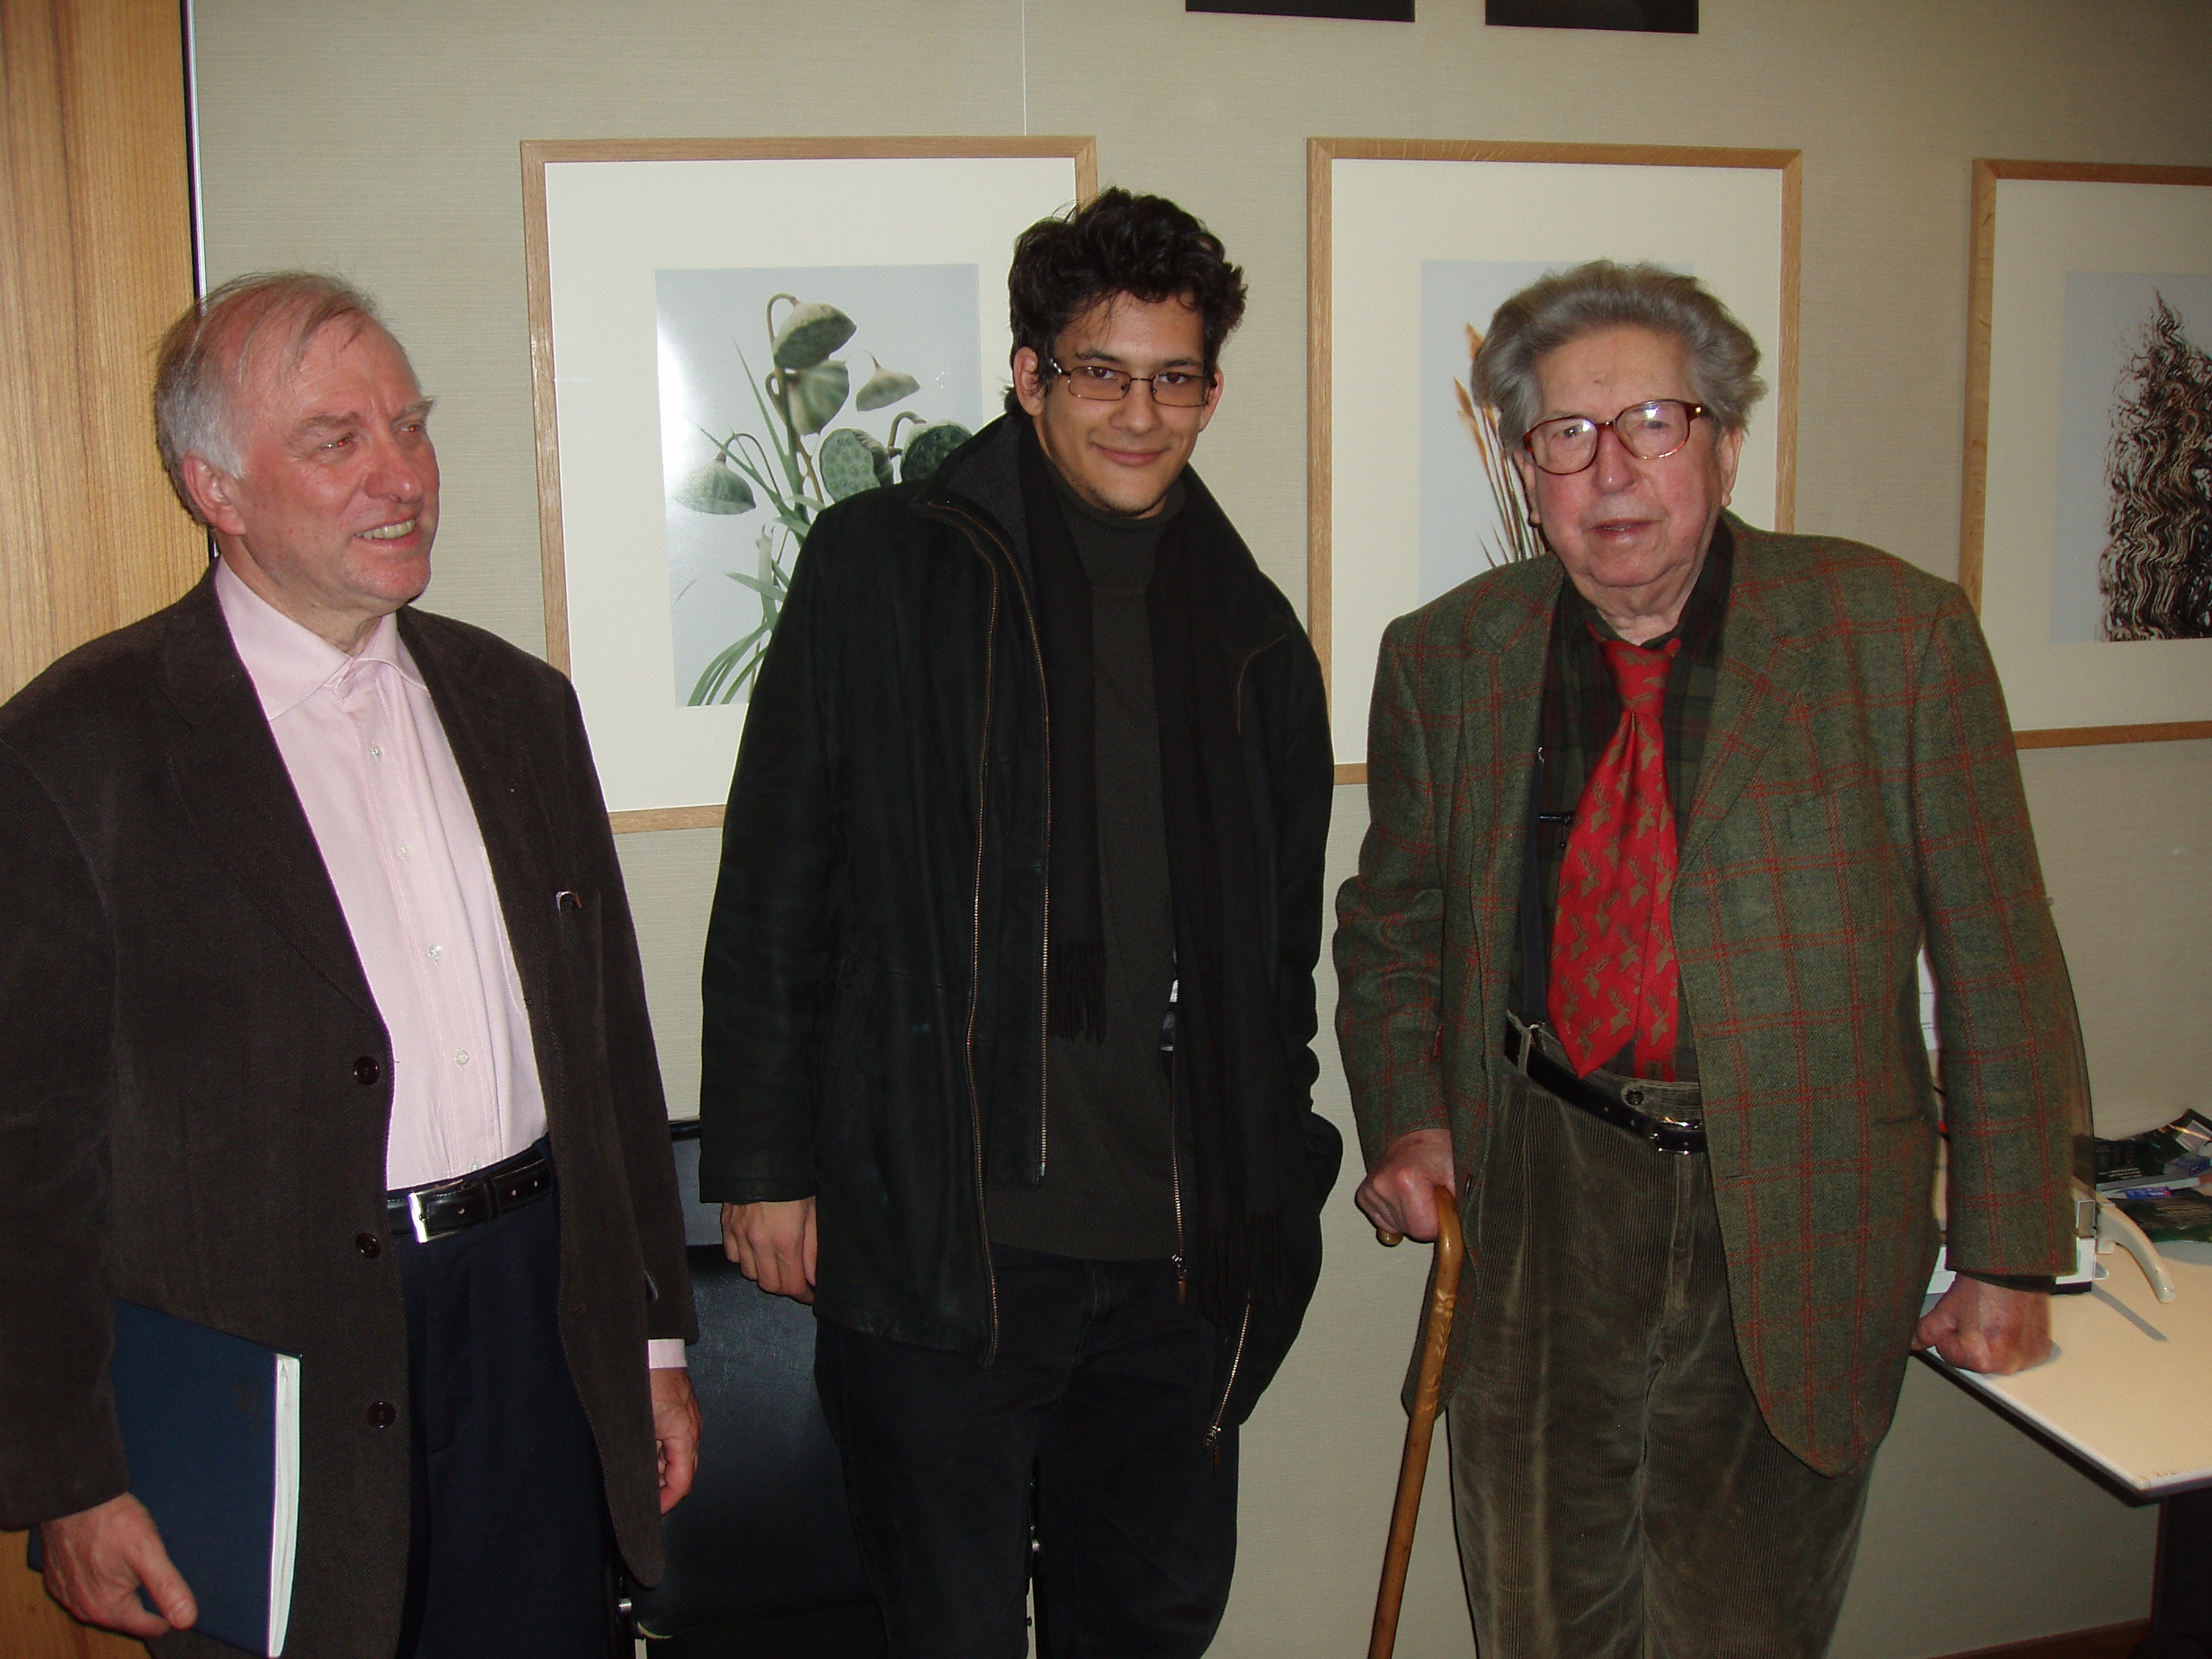 Jehan Stefan (center) with his master Alain Louvier (left) and Henri Dutilleux (right)